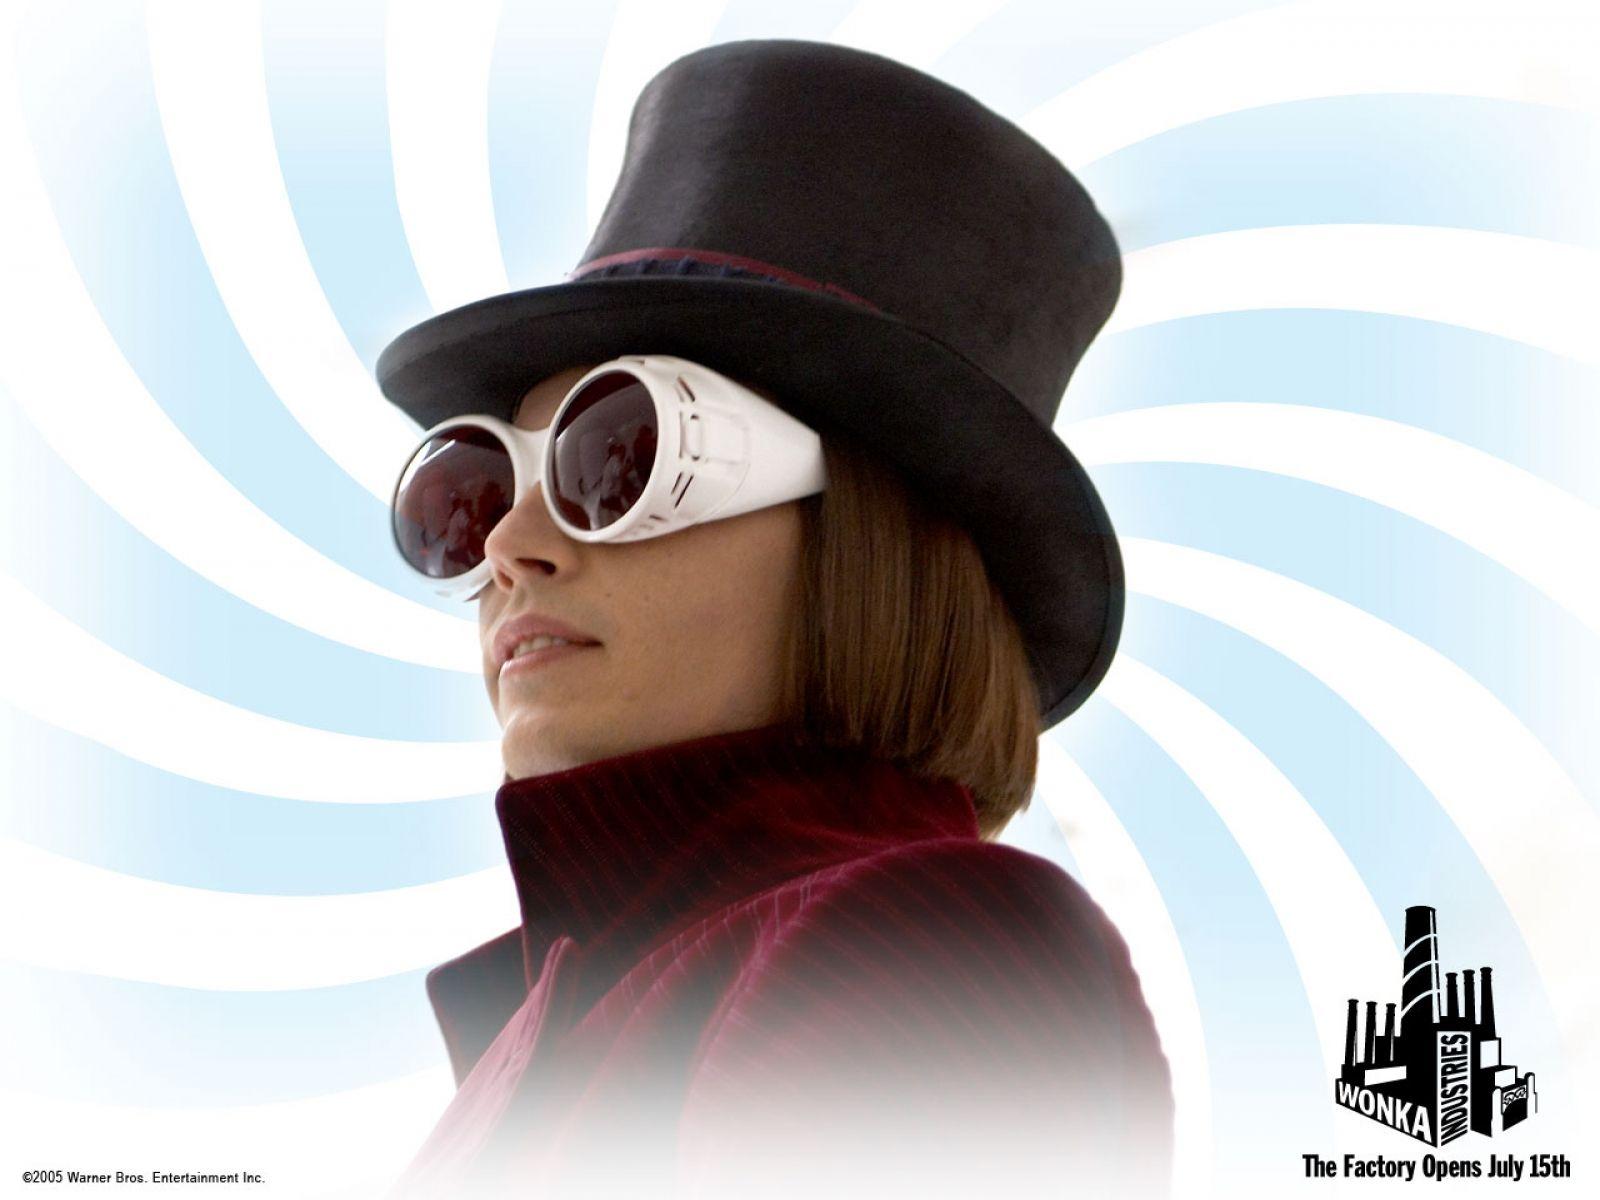 Willy Wonka sunglasses Wallpapers at Wallpaperist.